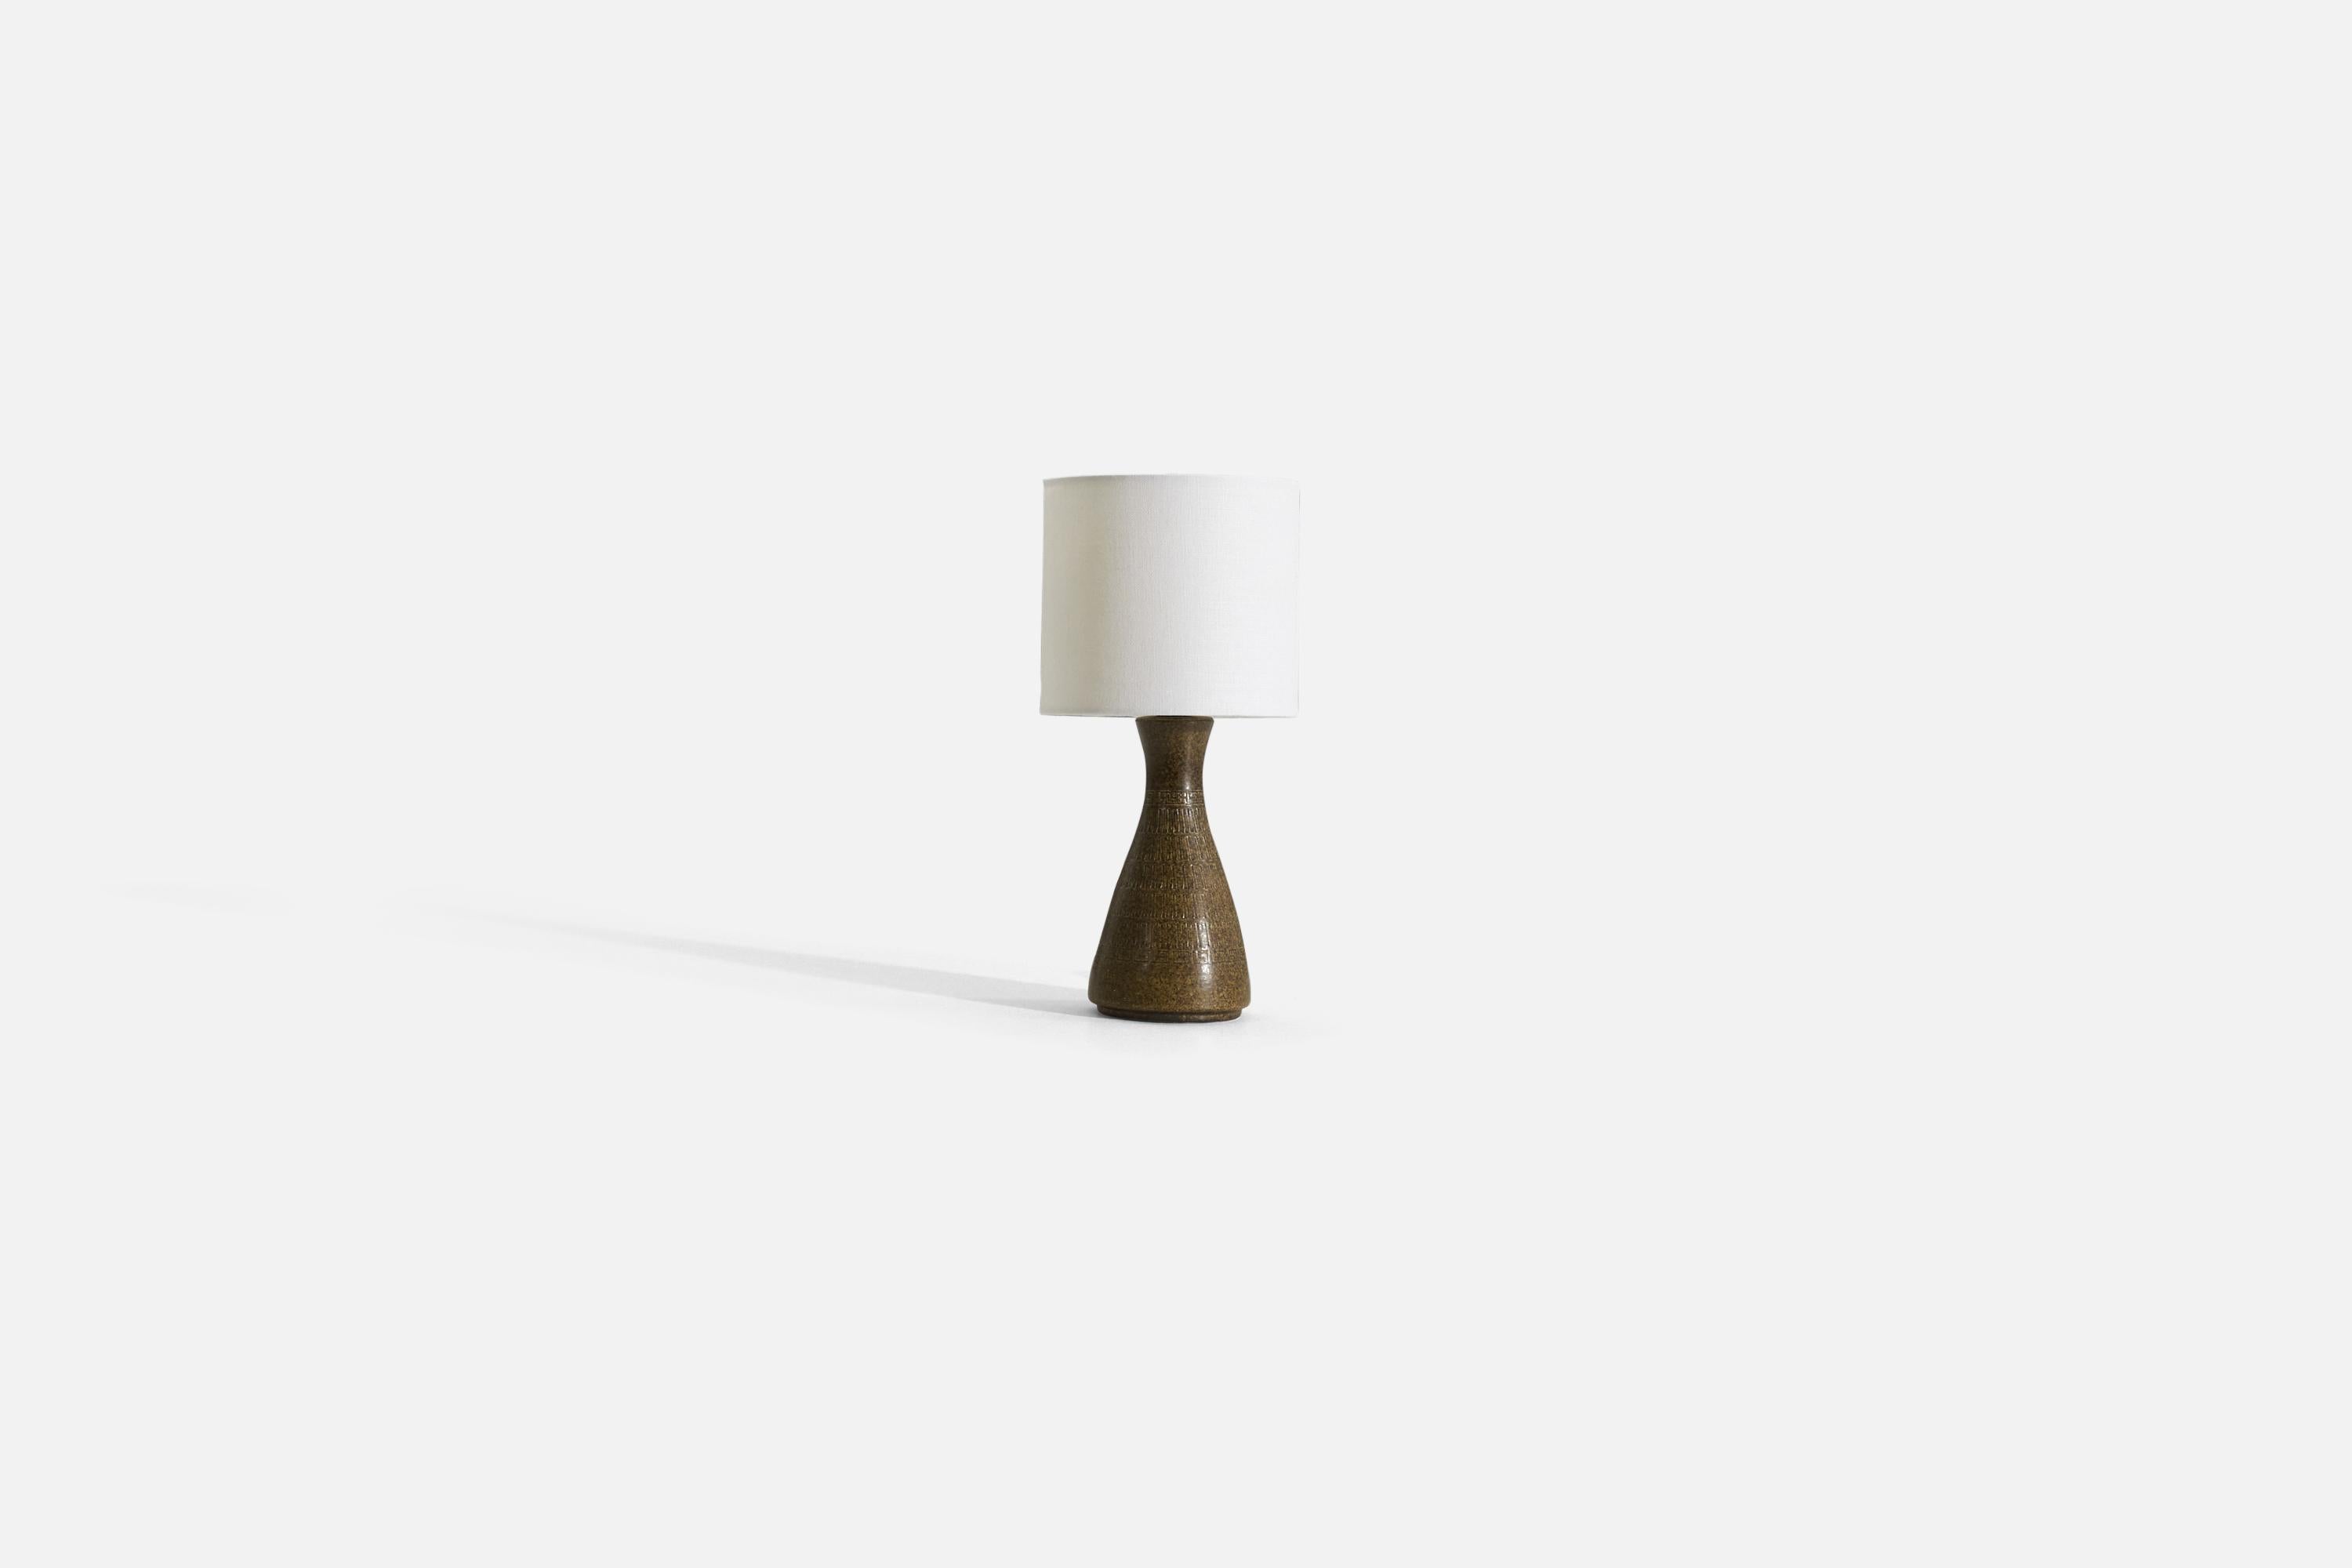 A brown glazed and incised earthenware table lamp produced by a Swedish designer, Sweden, 1960s. 

Sold without lampshade. 

Measurements listed are of lamp.
Shade : 6 x 6 x 5.5
Lamp with shade : 12.5 x 6 x 6.